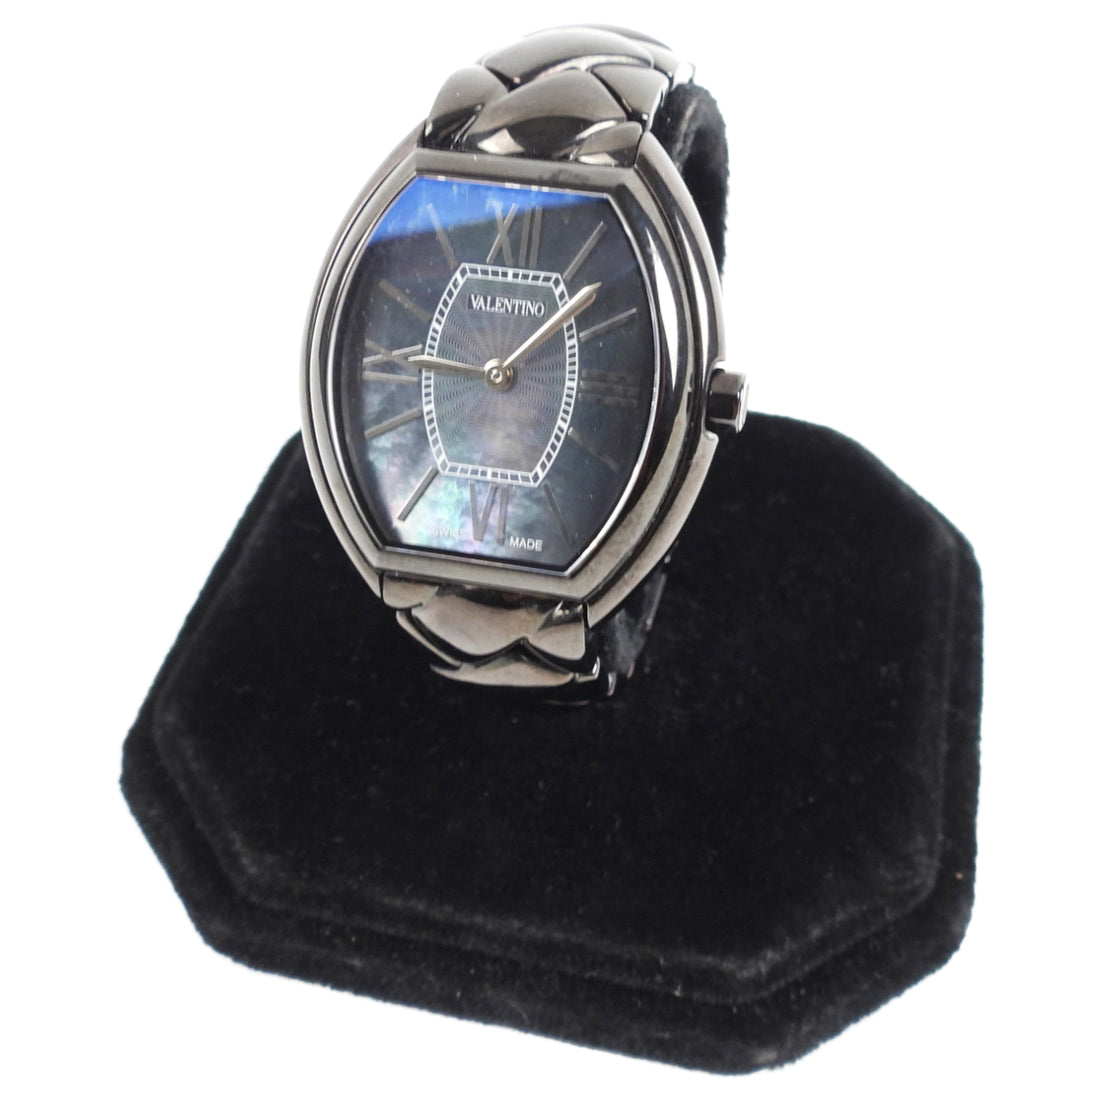 Valentino Black Stainless Abalone Face Watch